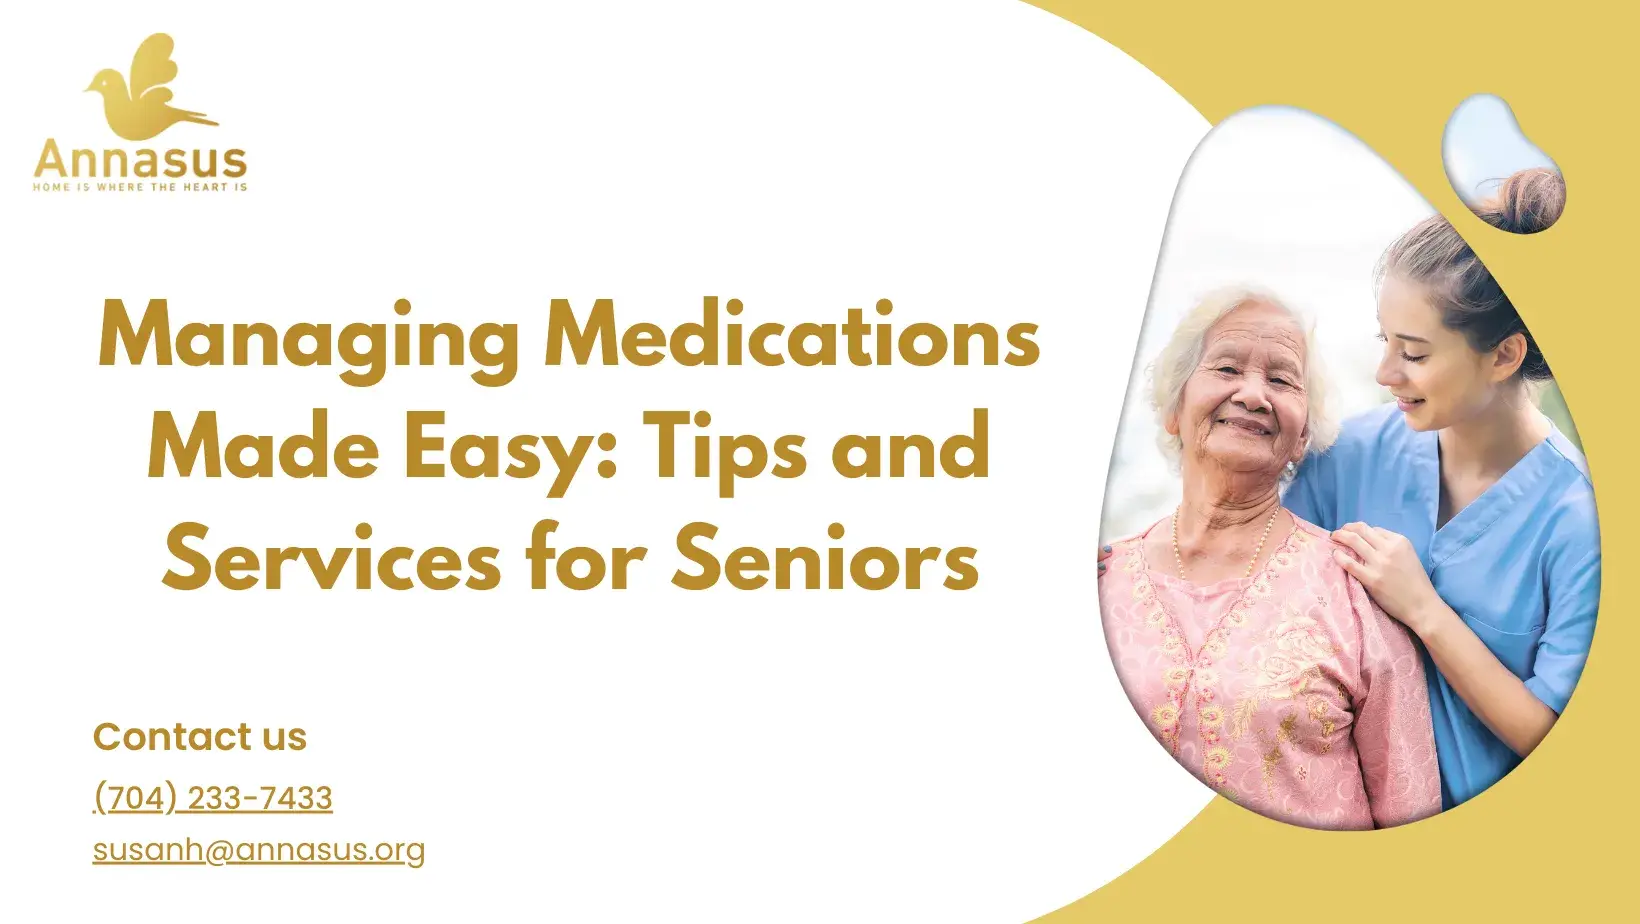 Managing Medications Made Easy: Tips and Services for Seniors